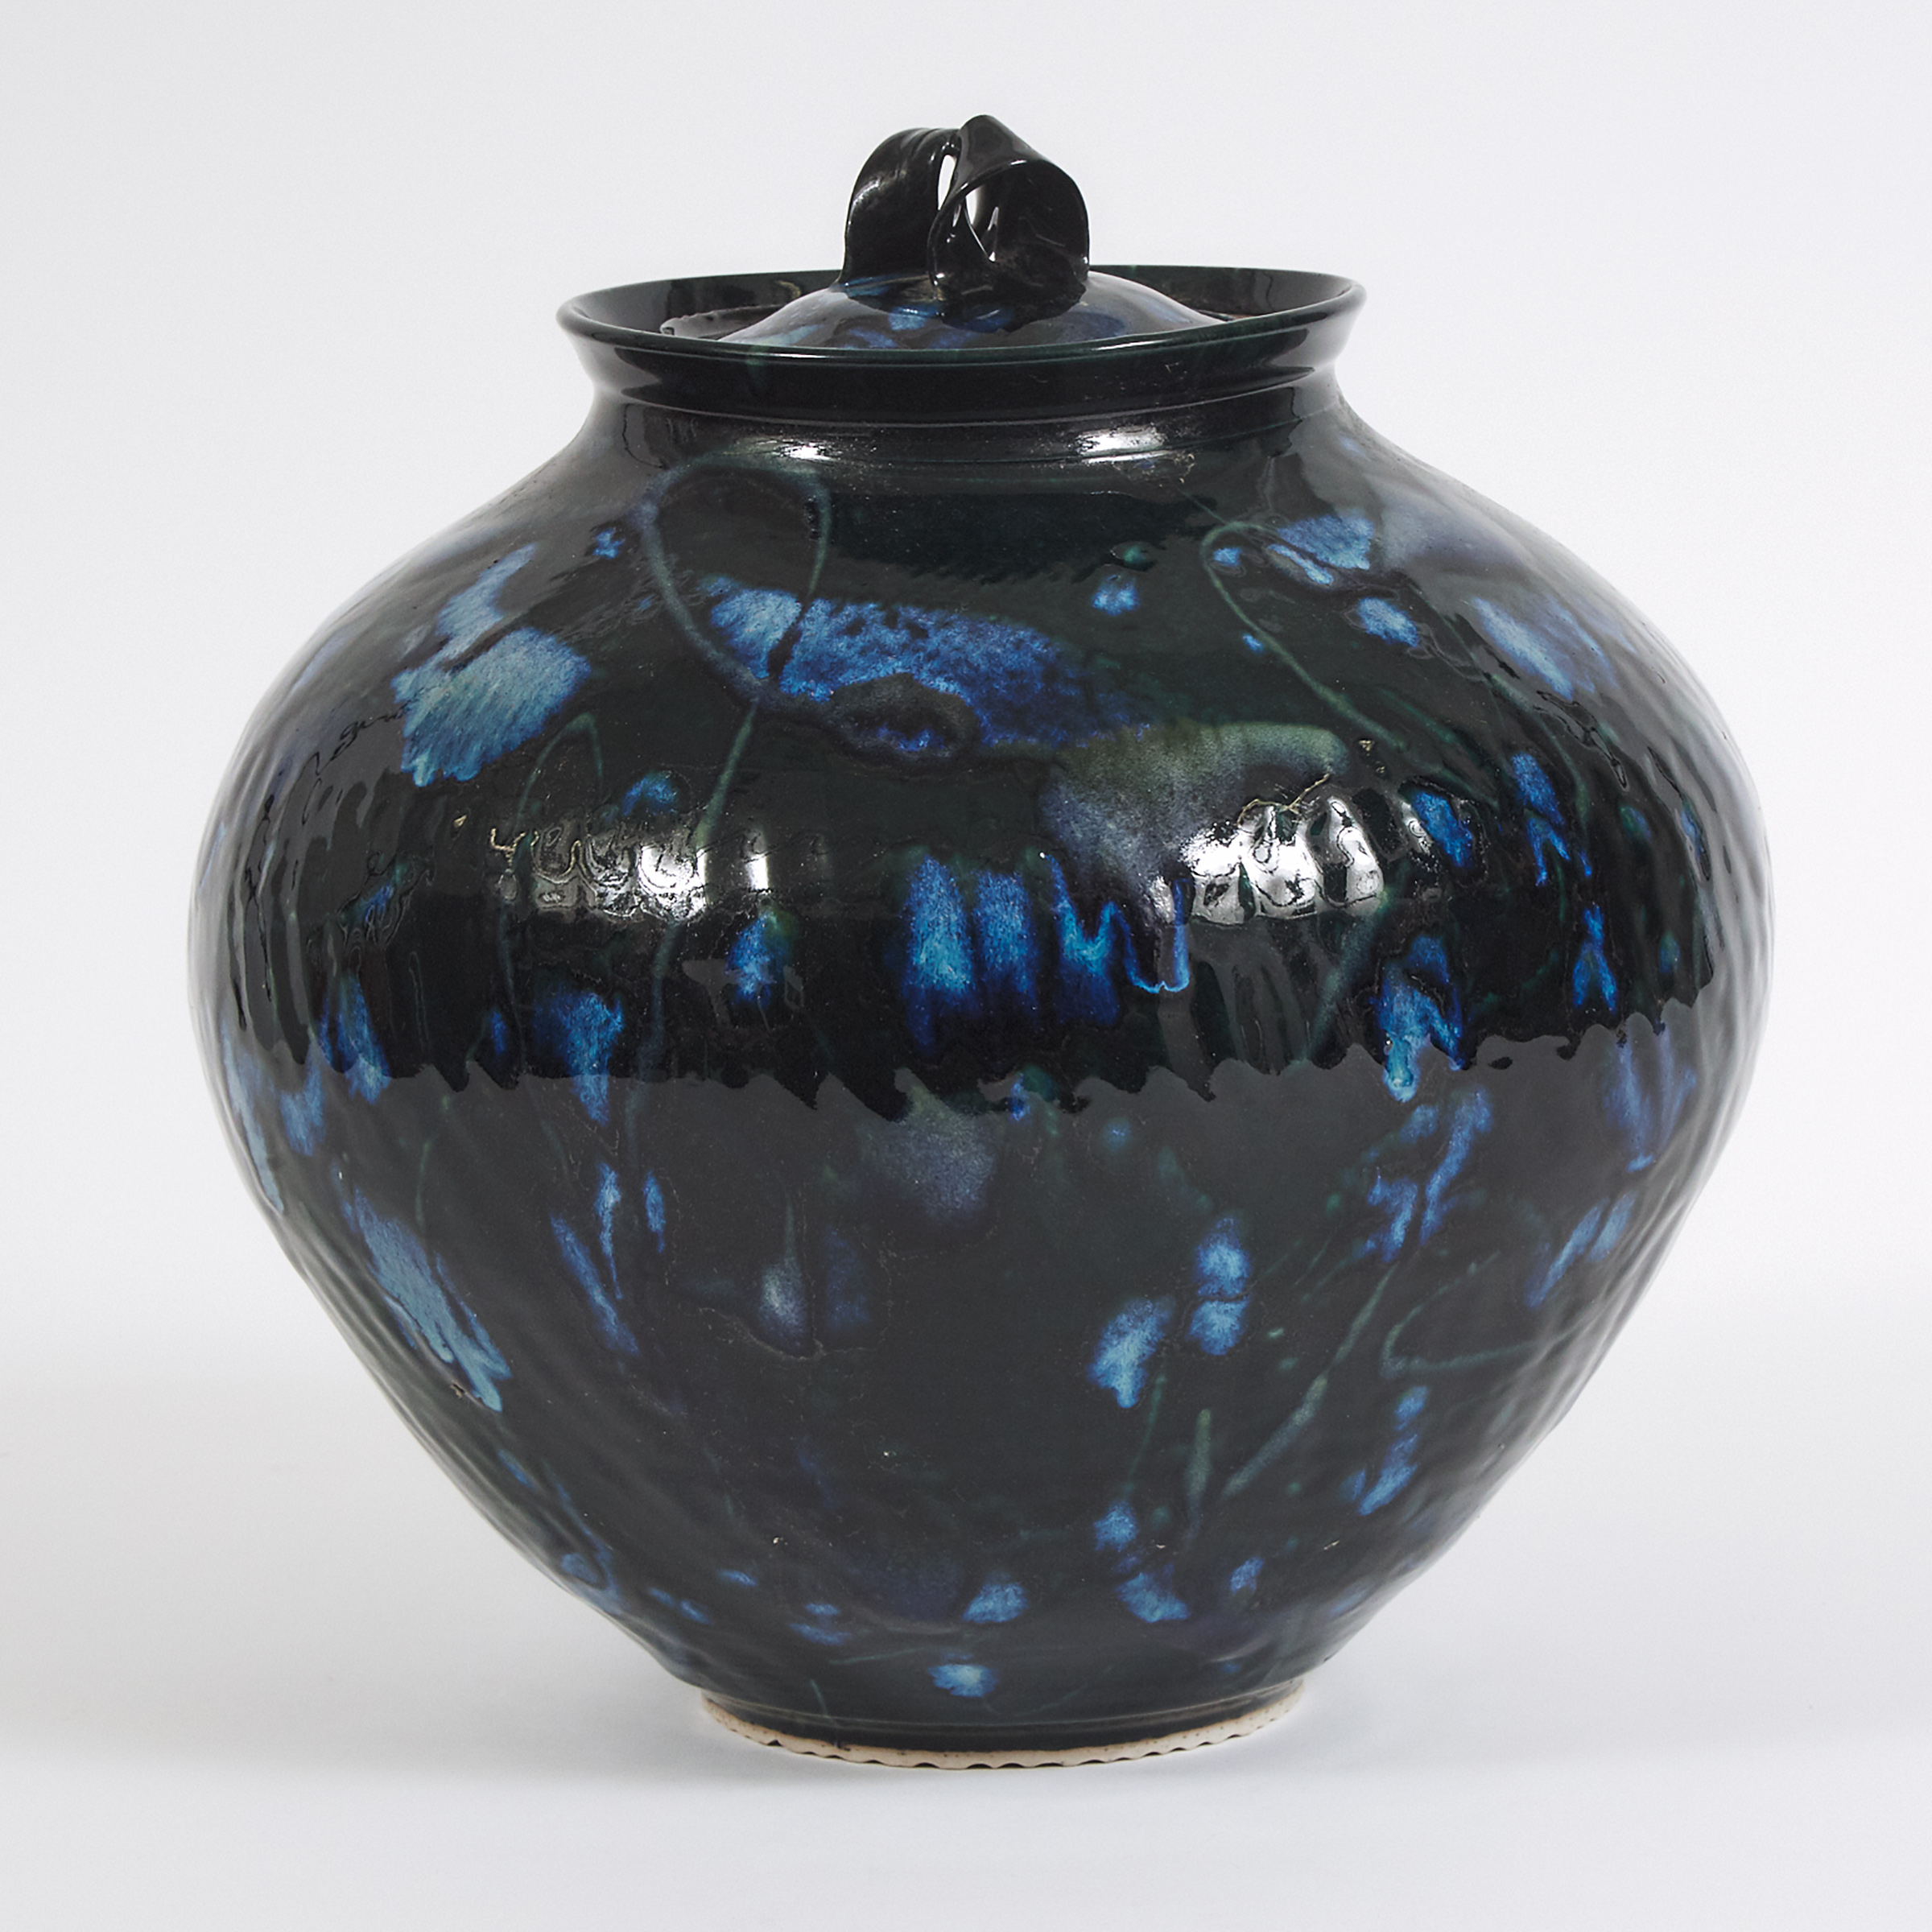 Kayo O'Young (Canadian, b.1950), Blue and Green Glazed Double Covered Vase, 1993